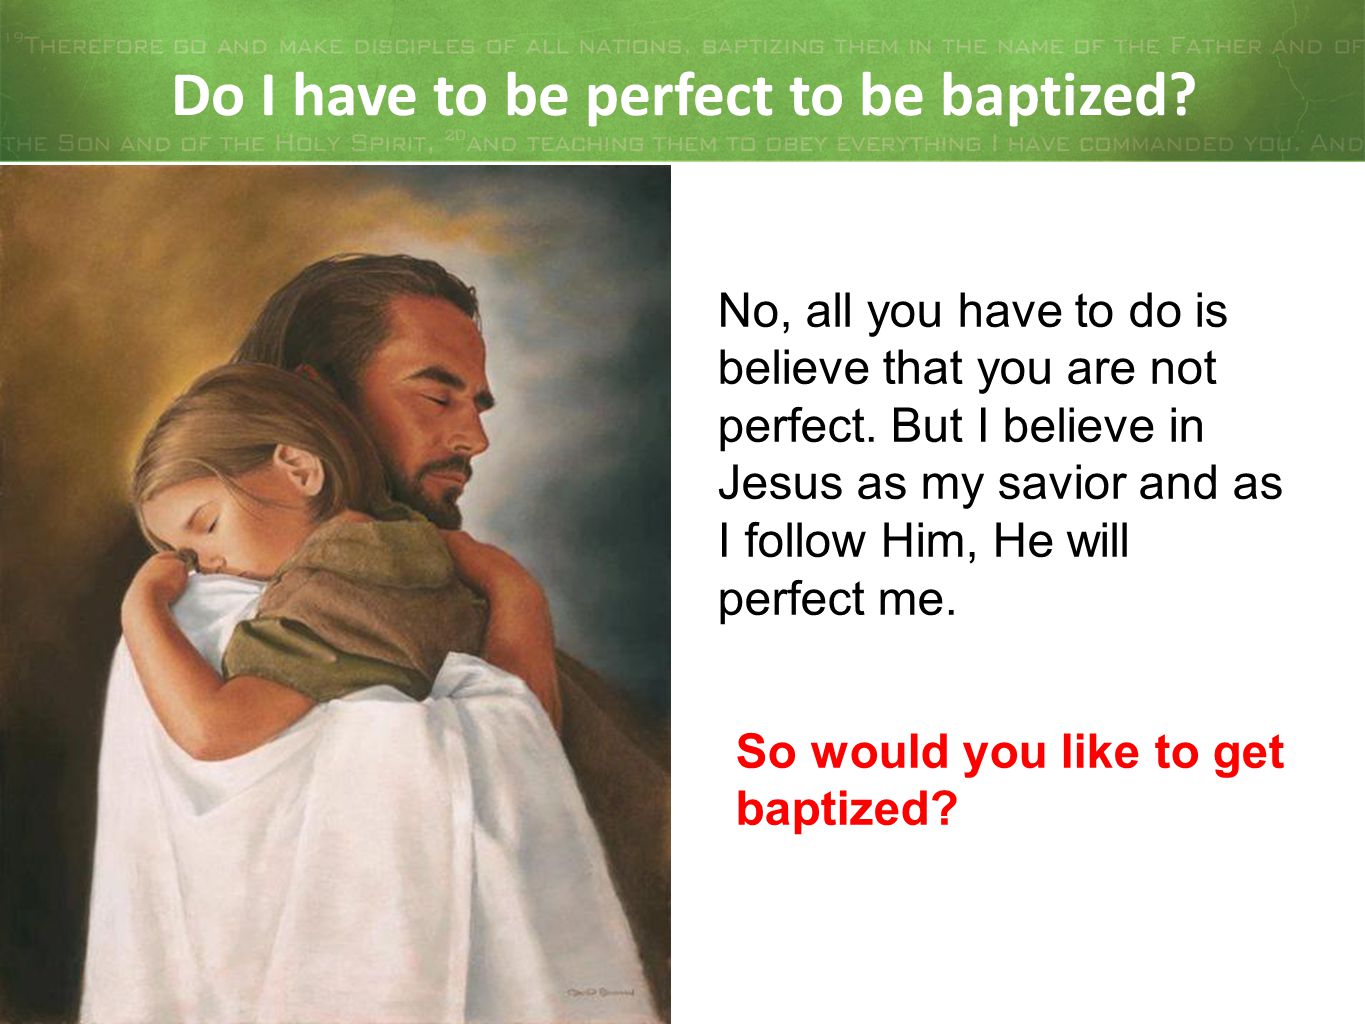 Do I have to be perfect to be baptized